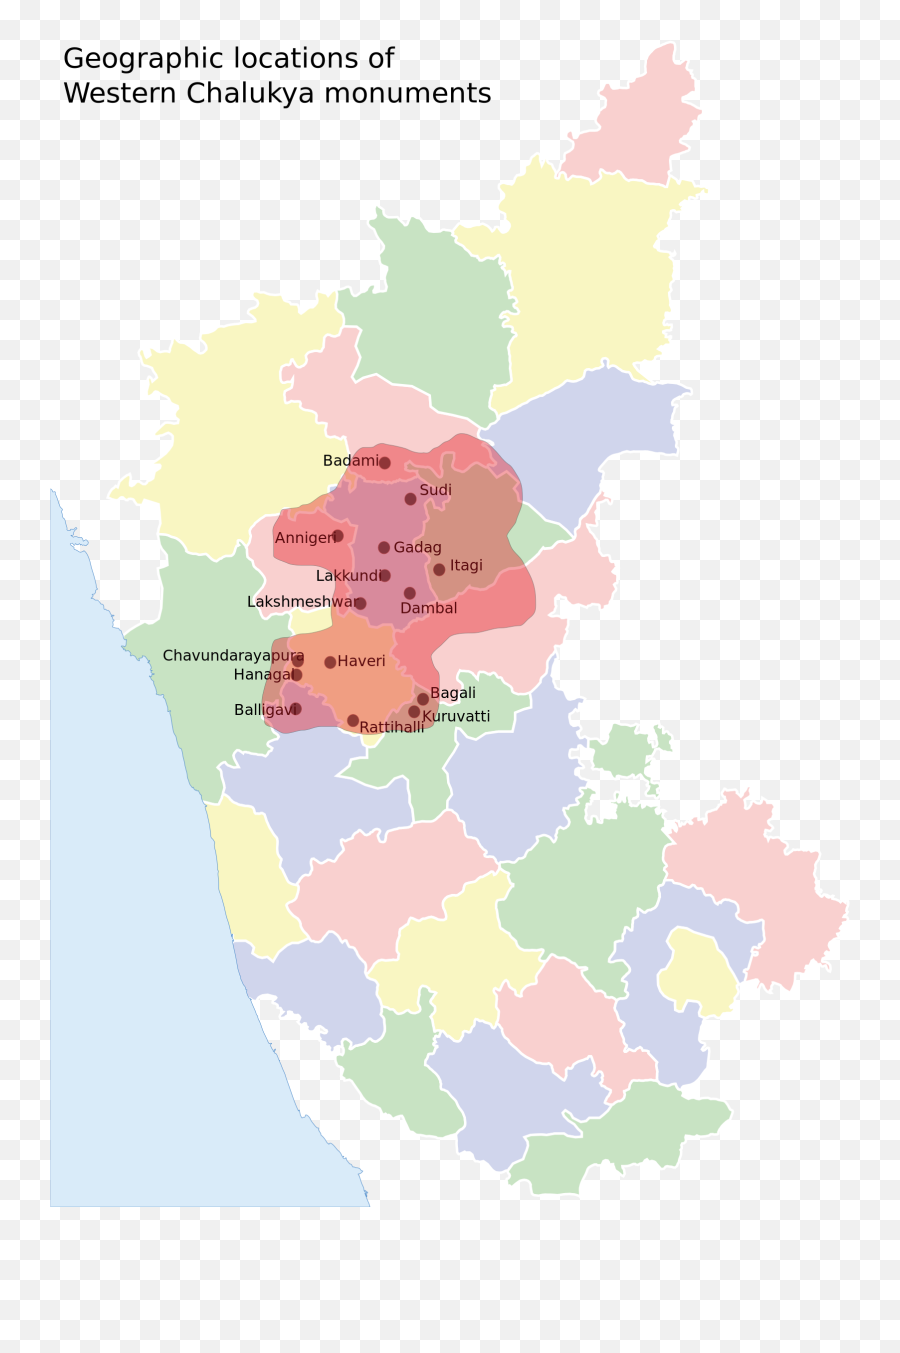 Western Chalukya Architecture - Karnataka Map With Districts Emoji,Japanese Emoticons Flower In Hair